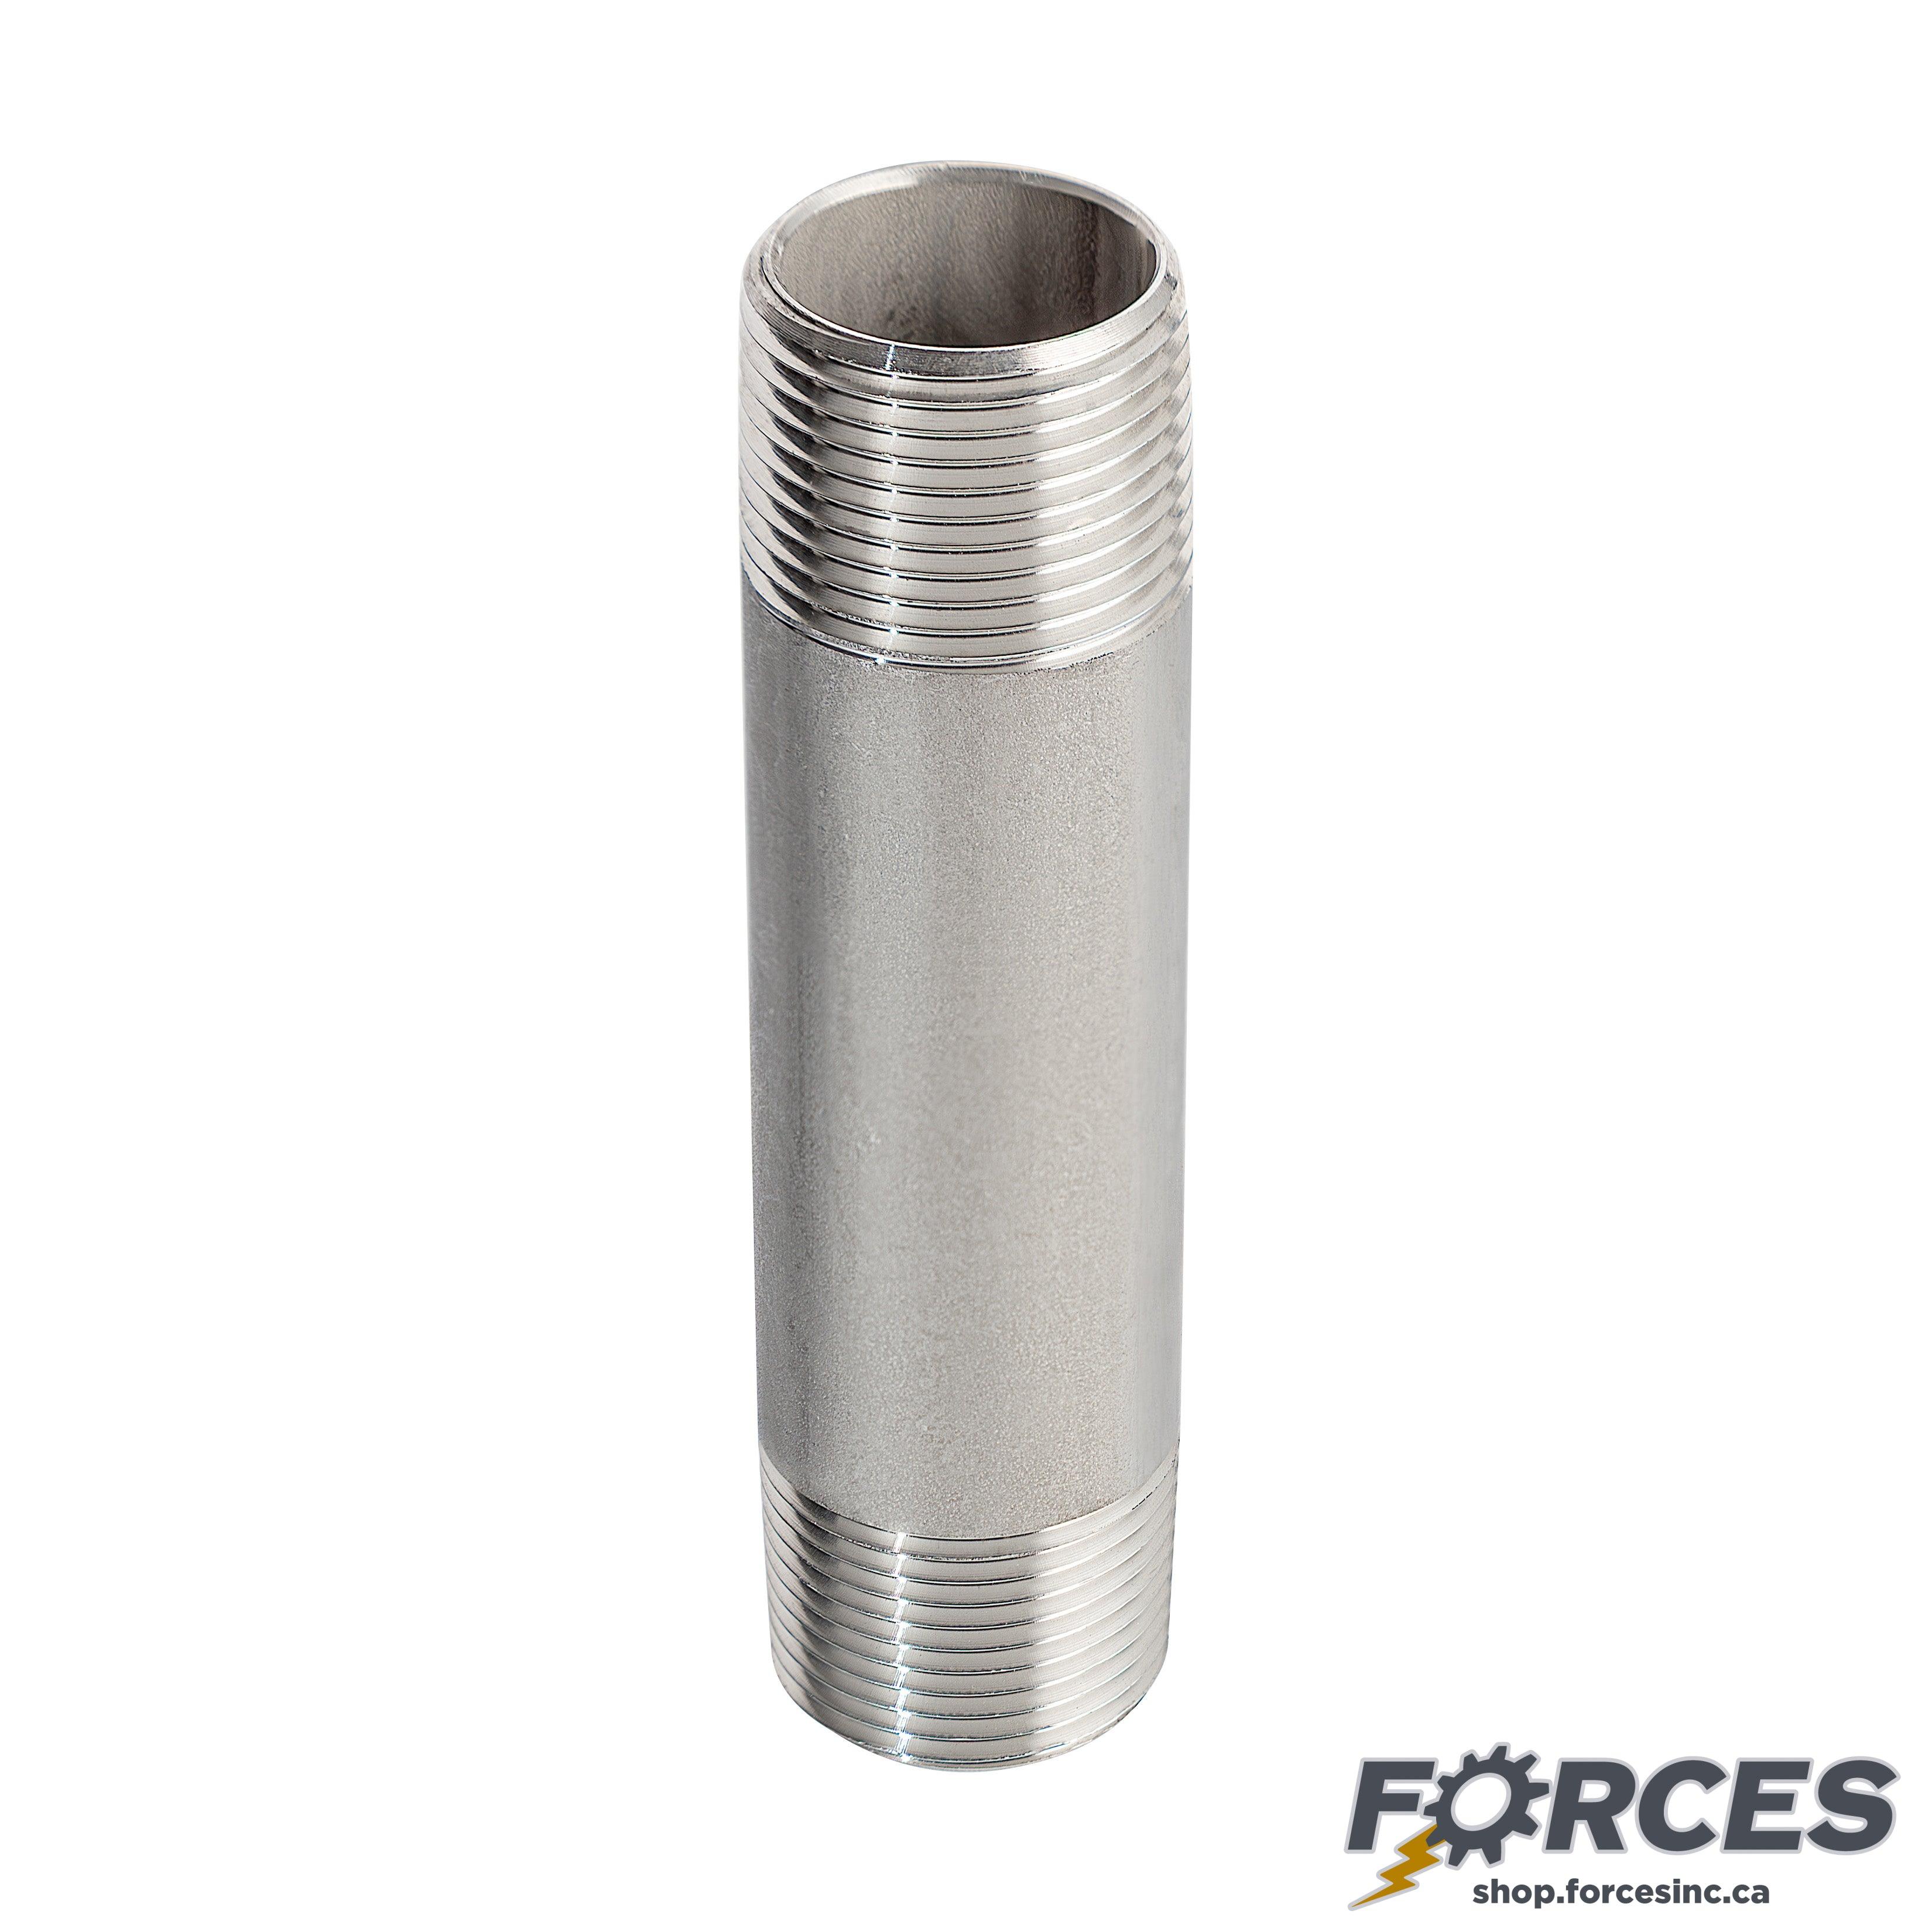 1/2" X 12" Long Nipple - Stainless Steel 316 - Forces Inc